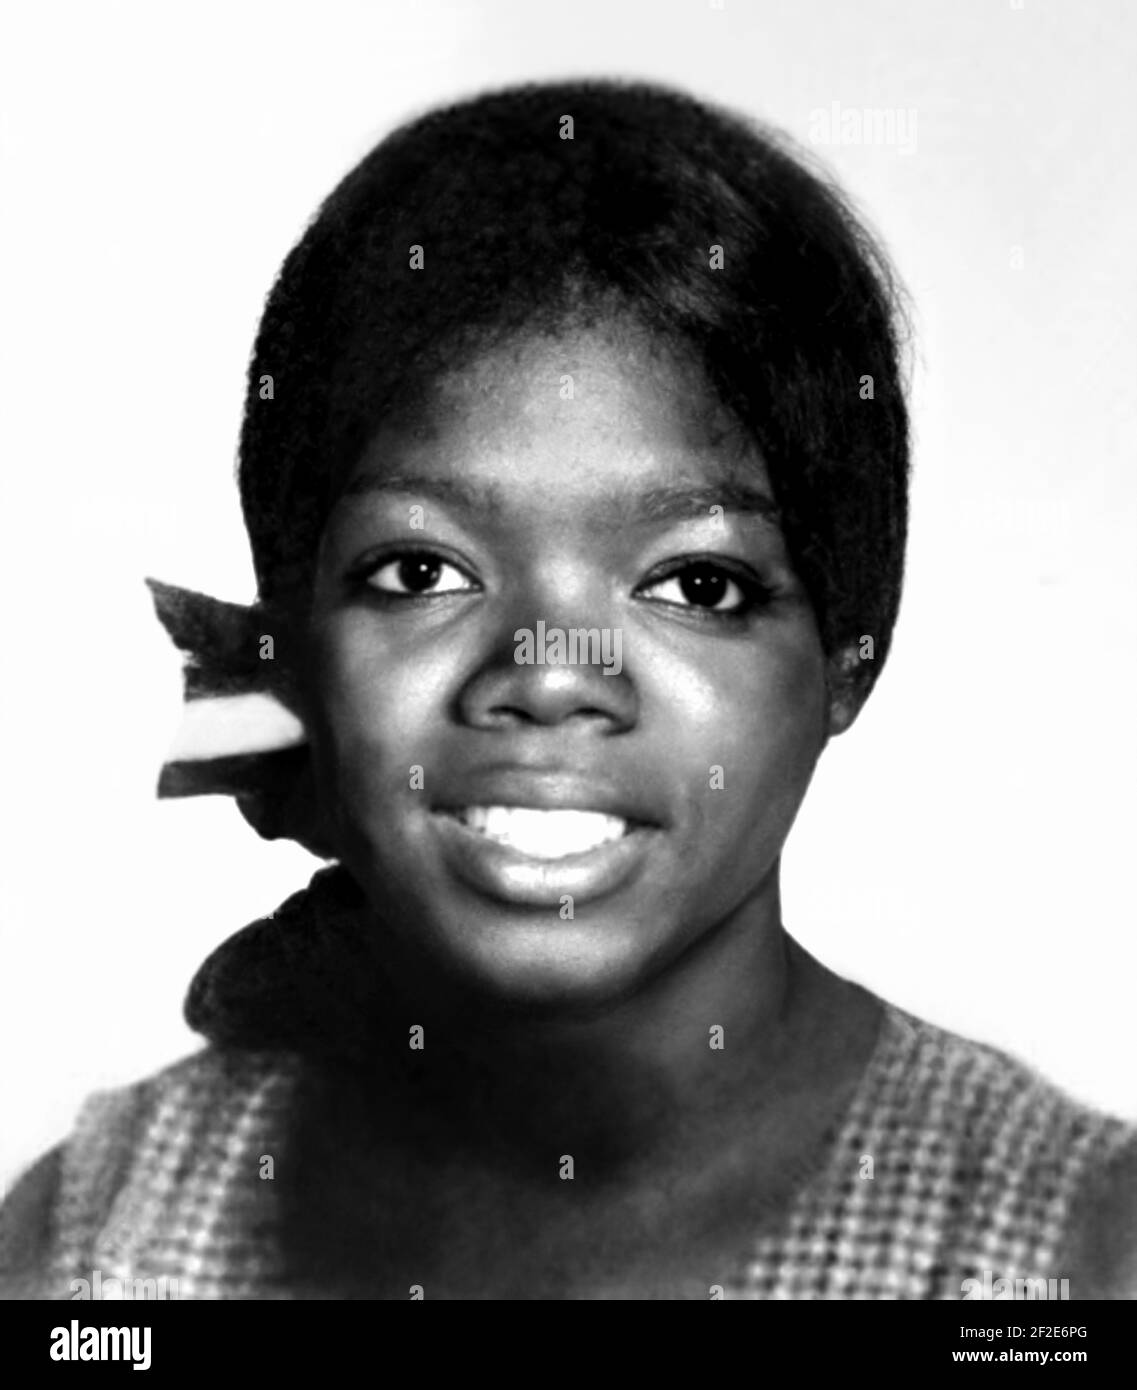 1972 ca , USA : The celebrated American television talk show host, journalist , writer and producer OPRAH WINFREY ( born 29 january 1954 ), when was young aged 18 . Unknown photographer. - HISTORY - FOTO STORICHE - personalità da giovane giovani - personality personalities when was young - PORTRAIT - RITRATTO - GIORNALISTA - JOURNALIST - GIORNALISMO - JOURNALISM - produttore - conduttore televisivo - presentatore - TV - produttore - smile - sorriso --- ARCHIVIO GBB Stock Photo